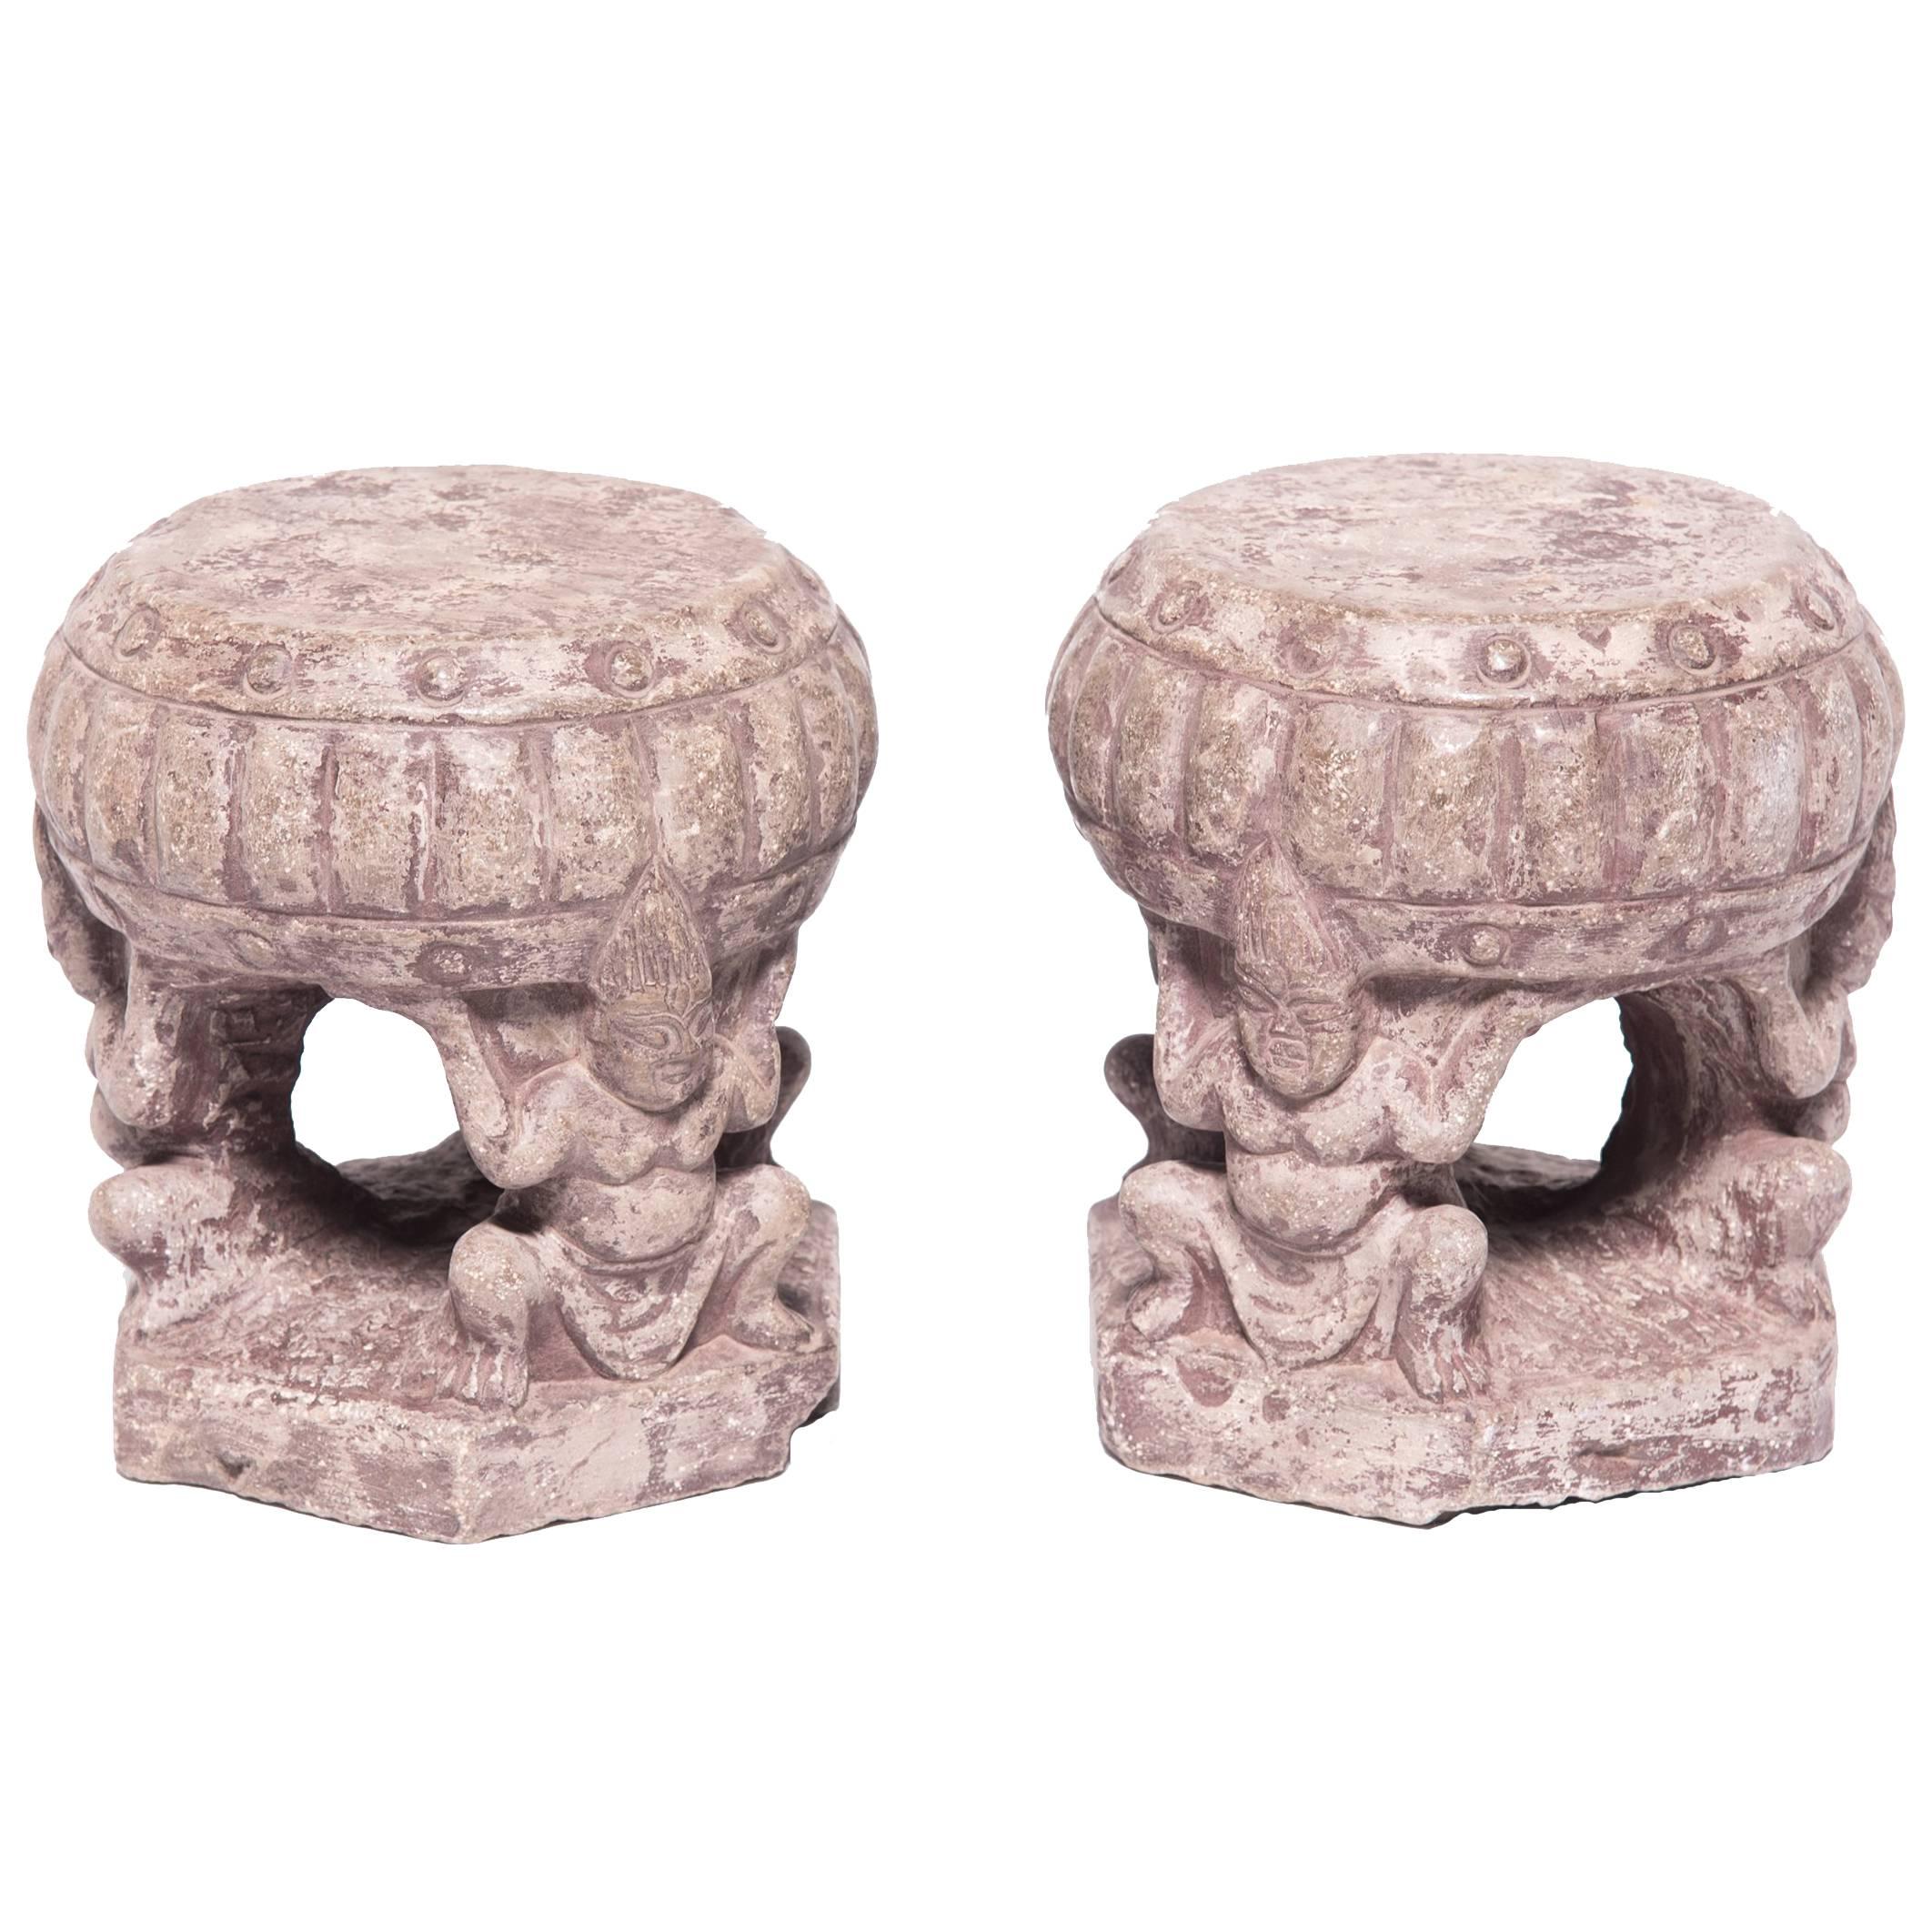 Pair of Chinese Stone Attendant Charms